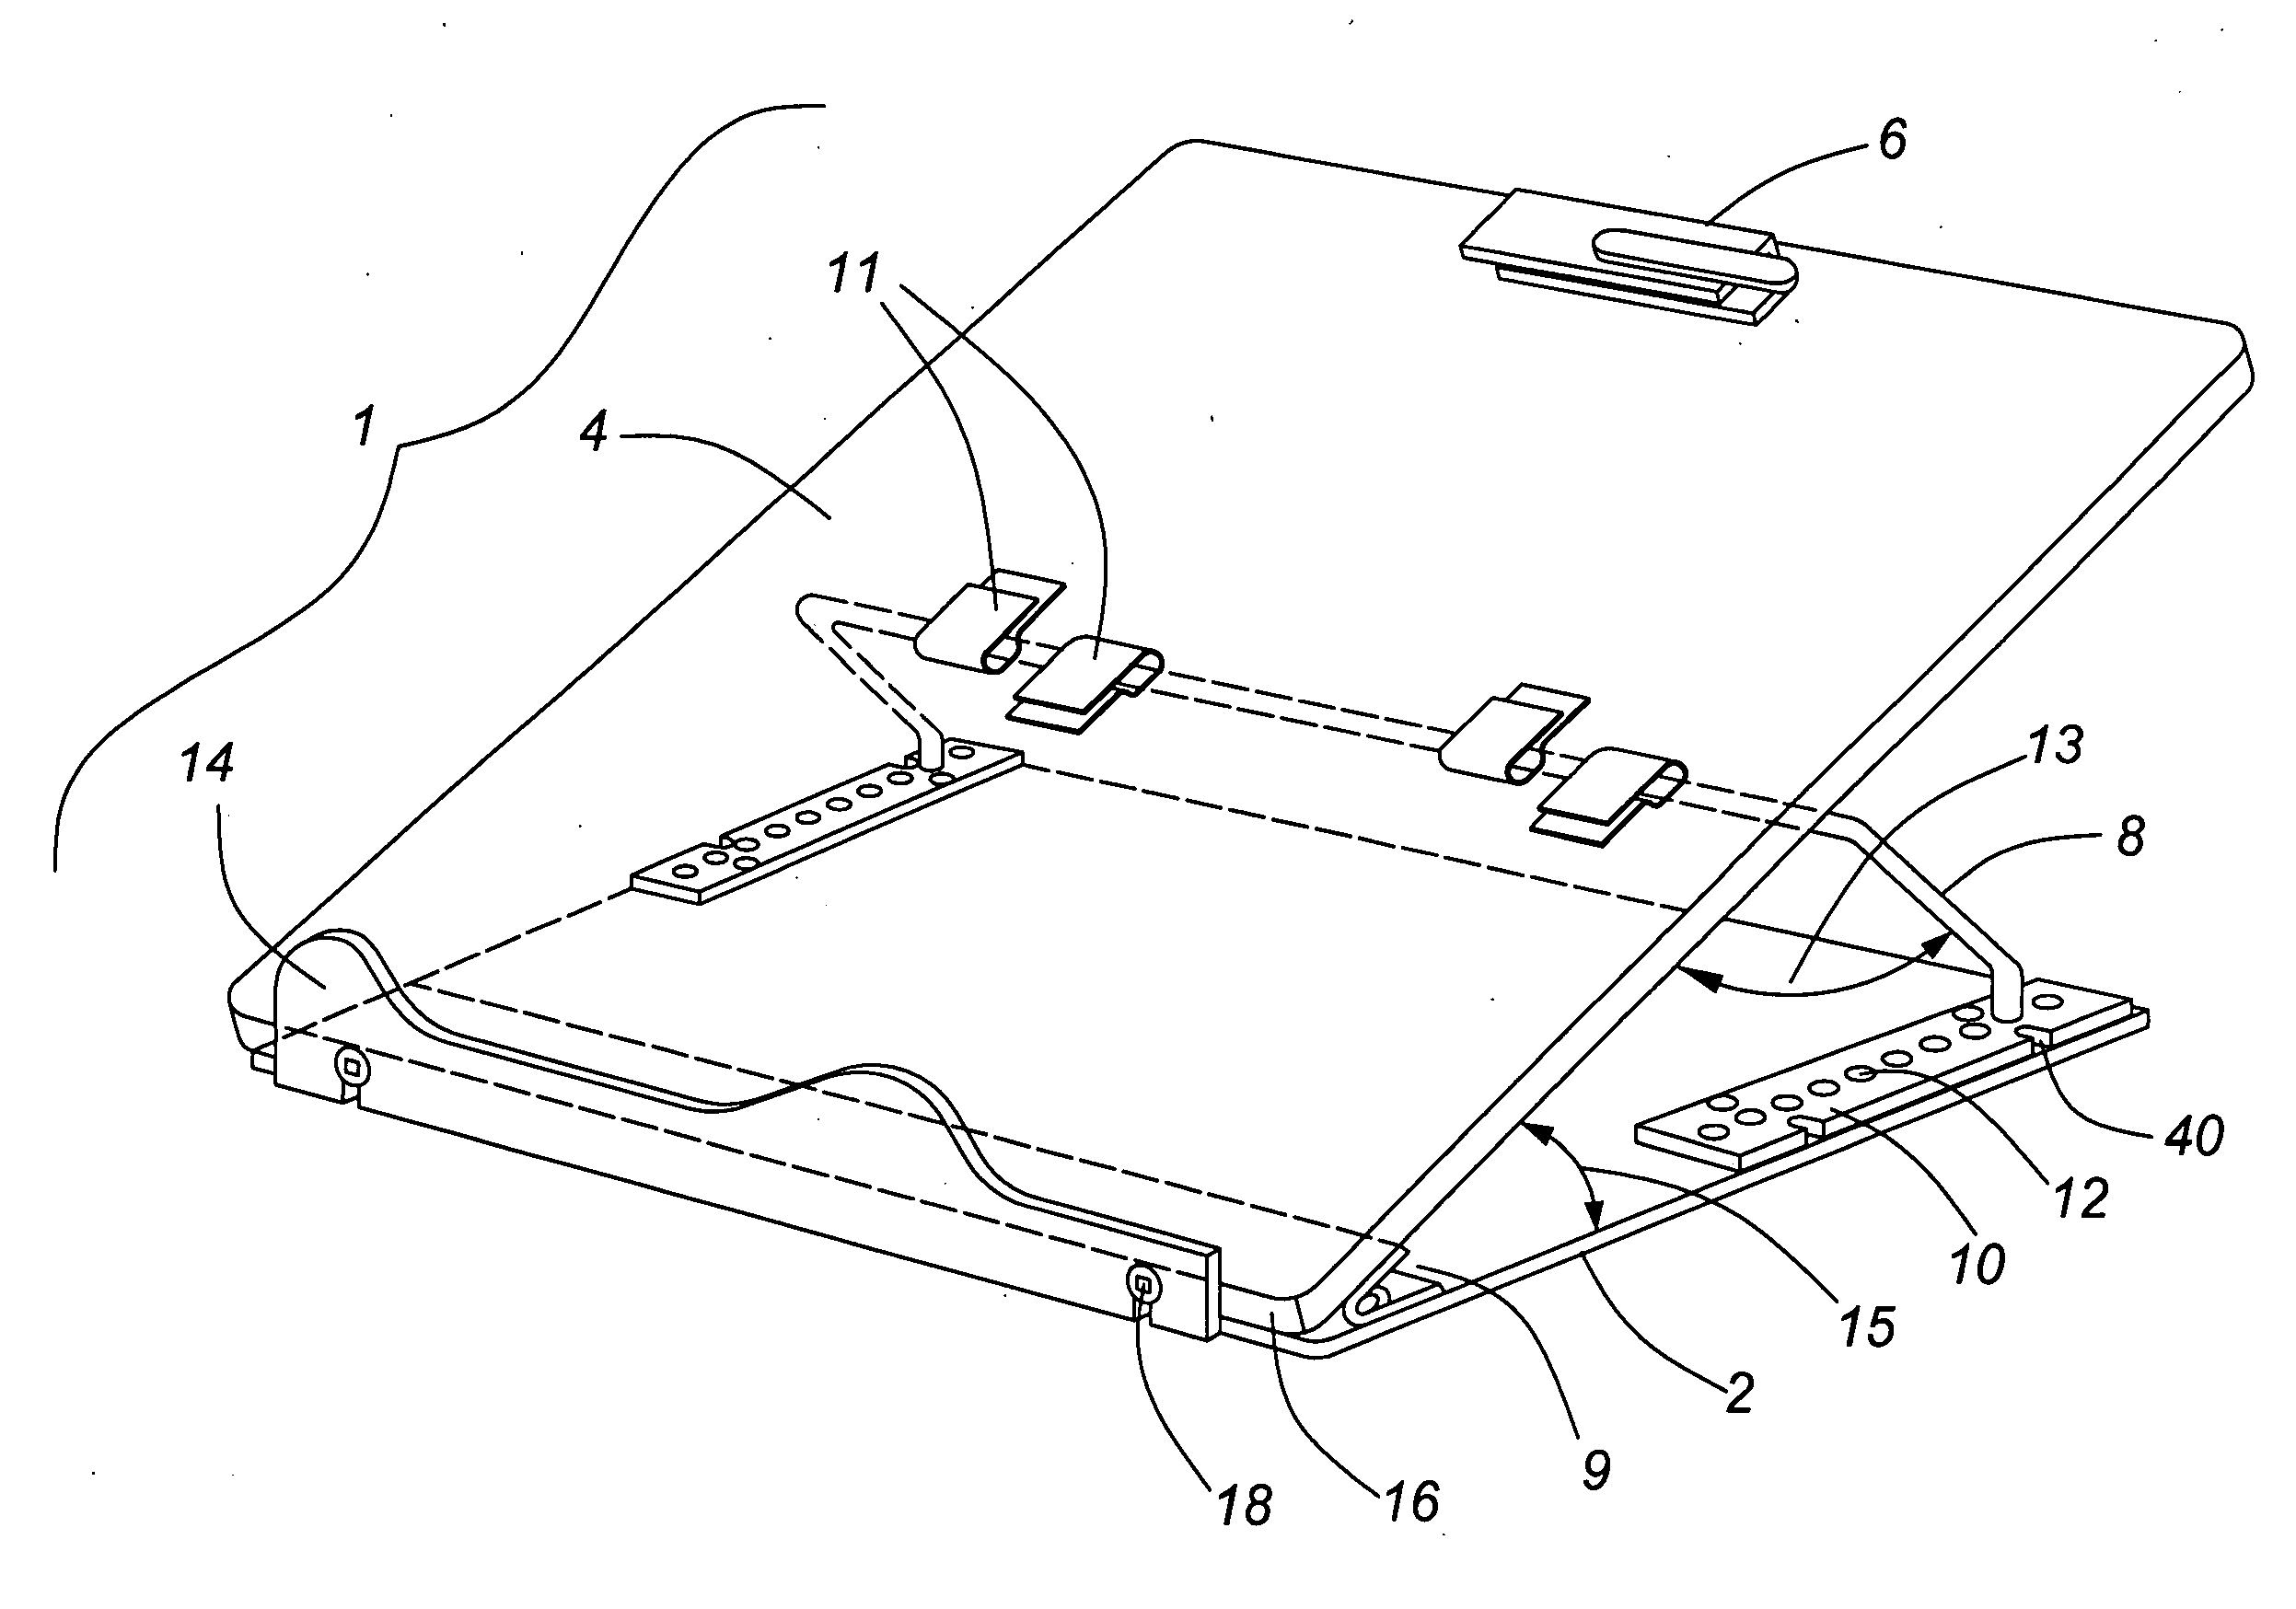 Book and document holding device